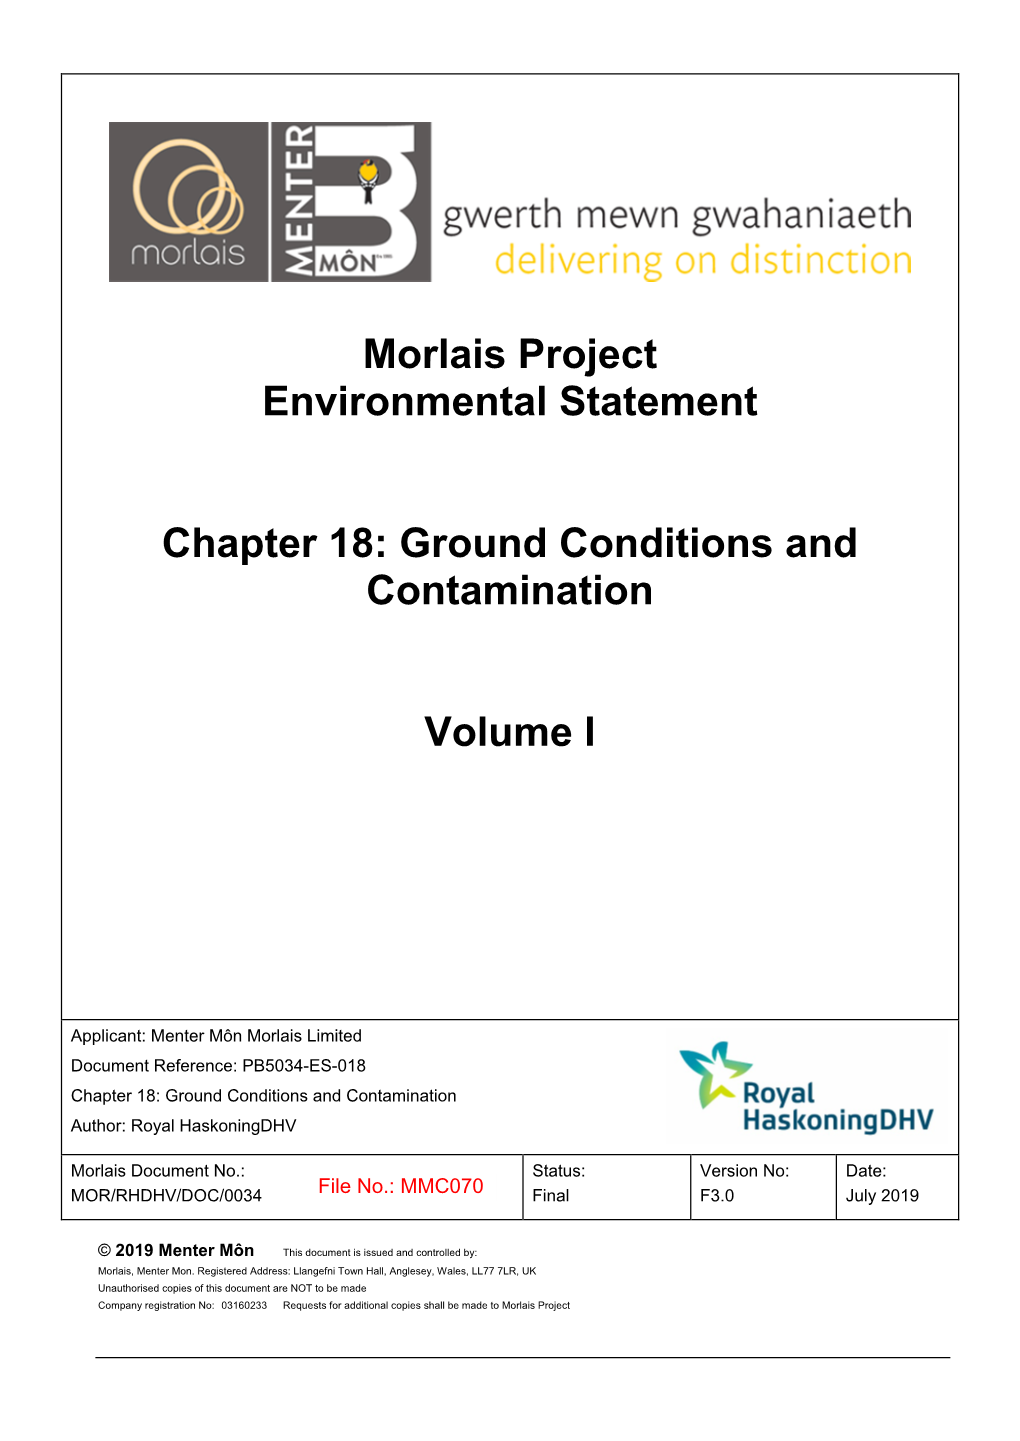 Ground Conditions and Contamination Volume I